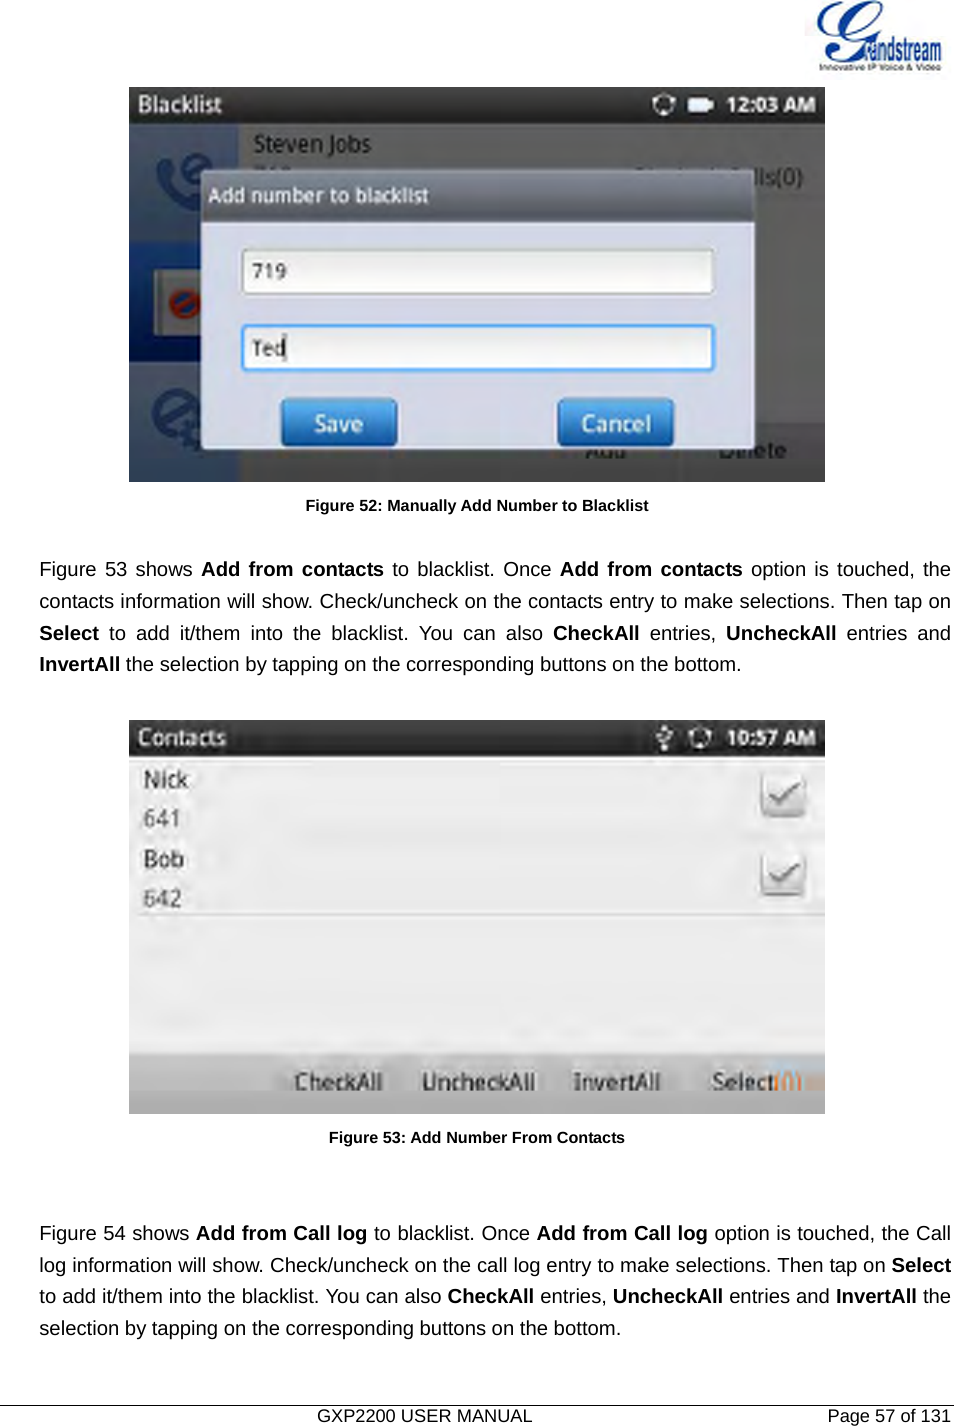   GXP2200 USER MANUAL       Page 57 of 131                                   Figure 52: Manually Add Number to Blacklist  Figure 53 shows Add from contacts to blacklist. Once Add from contacts option is touched, the contacts information will show. Check/uncheck on the contacts entry to make selections. Then tap on Select to add it/them into the blacklist. You can also CheckAll entries, UncheckAll entries and InvertAll the selection by tapping on the corresponding buttons on the bottom.   Figure 53: Add Number From Contacts   Figure 54 shows Add from Call log to blacklist. Once Add from Call log option is touched, the Call log information will show. Check/uncheck on the call log entry to make selections. Then tap on Select to add it/them into the blacklist. You can also CheckAll entries, UncheckAll entries and InvertAll the selection by tapping on the corresponding buttons on the bottom.  